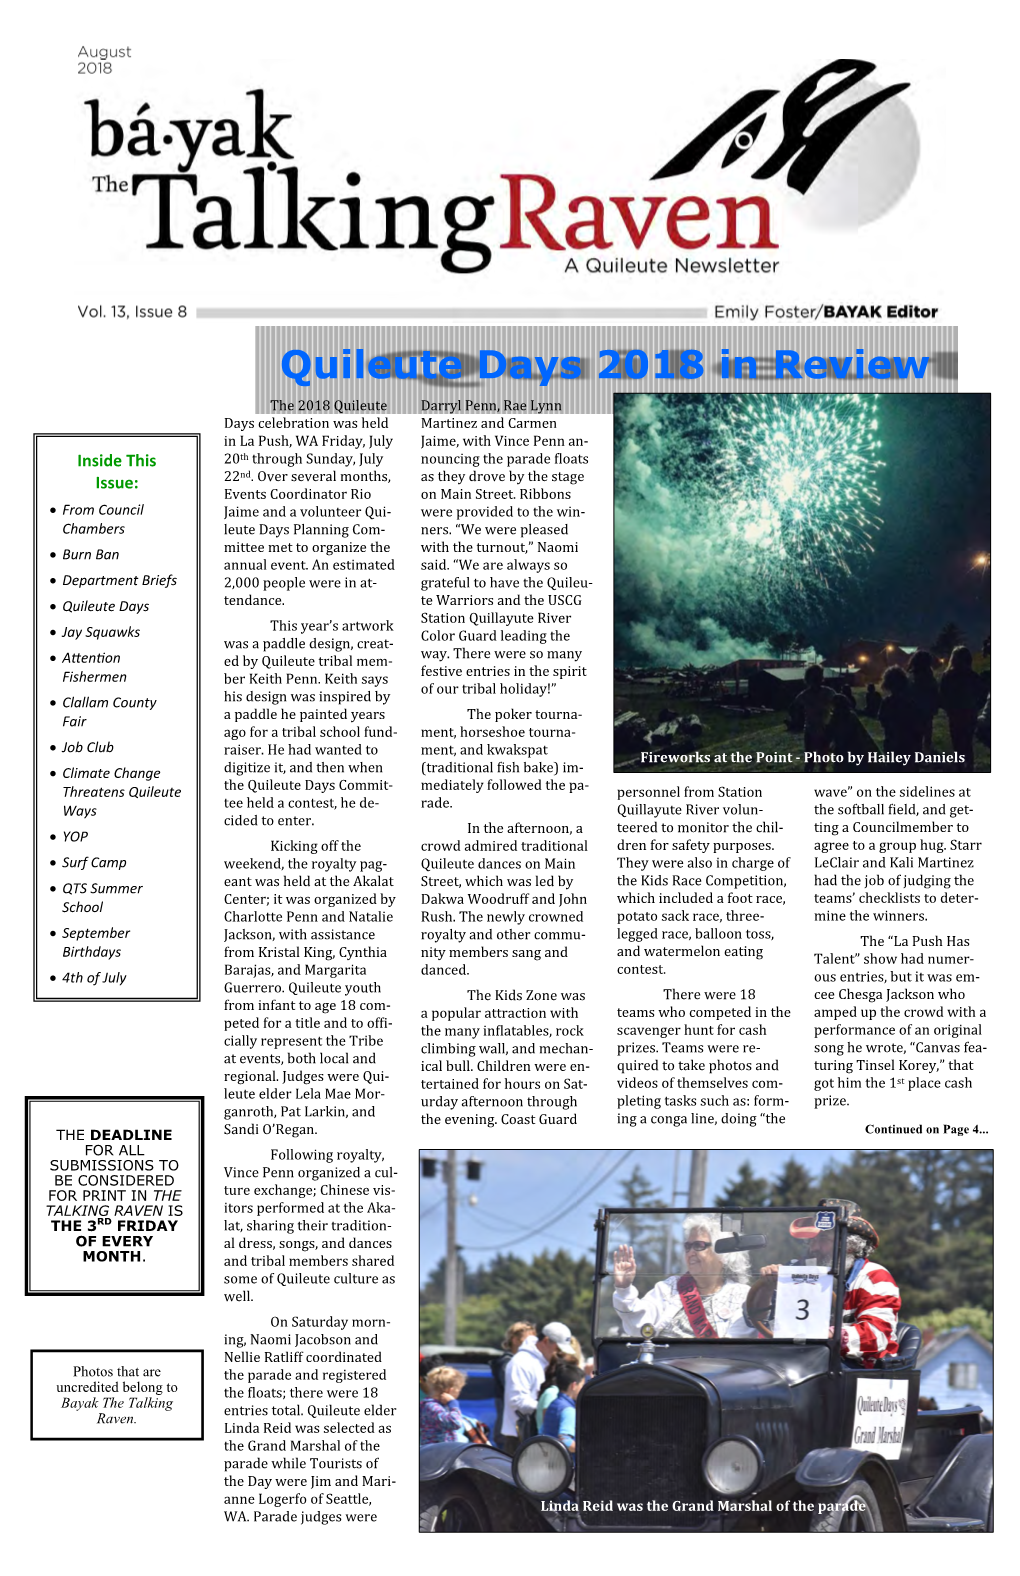 Quileute Days 2018 in Review